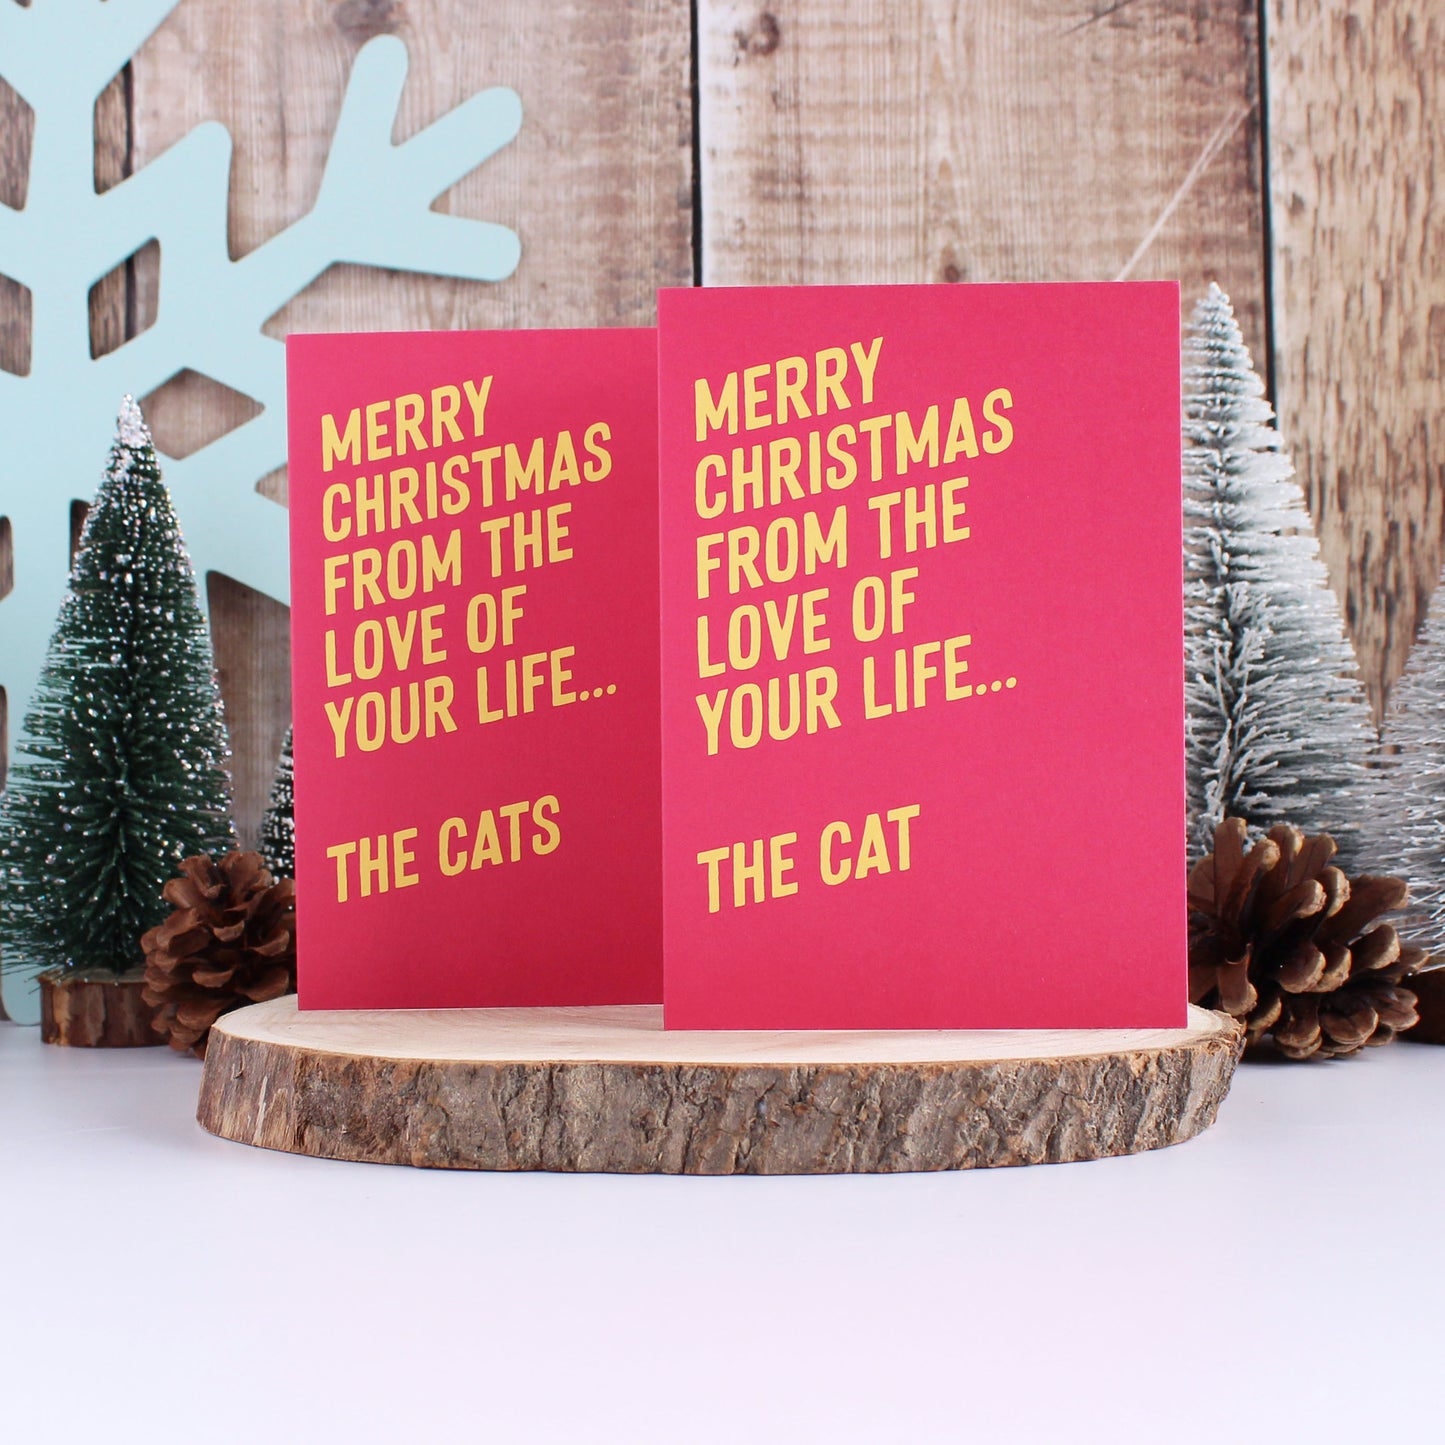 From the cat Christmas cards from Purple Tree Designs